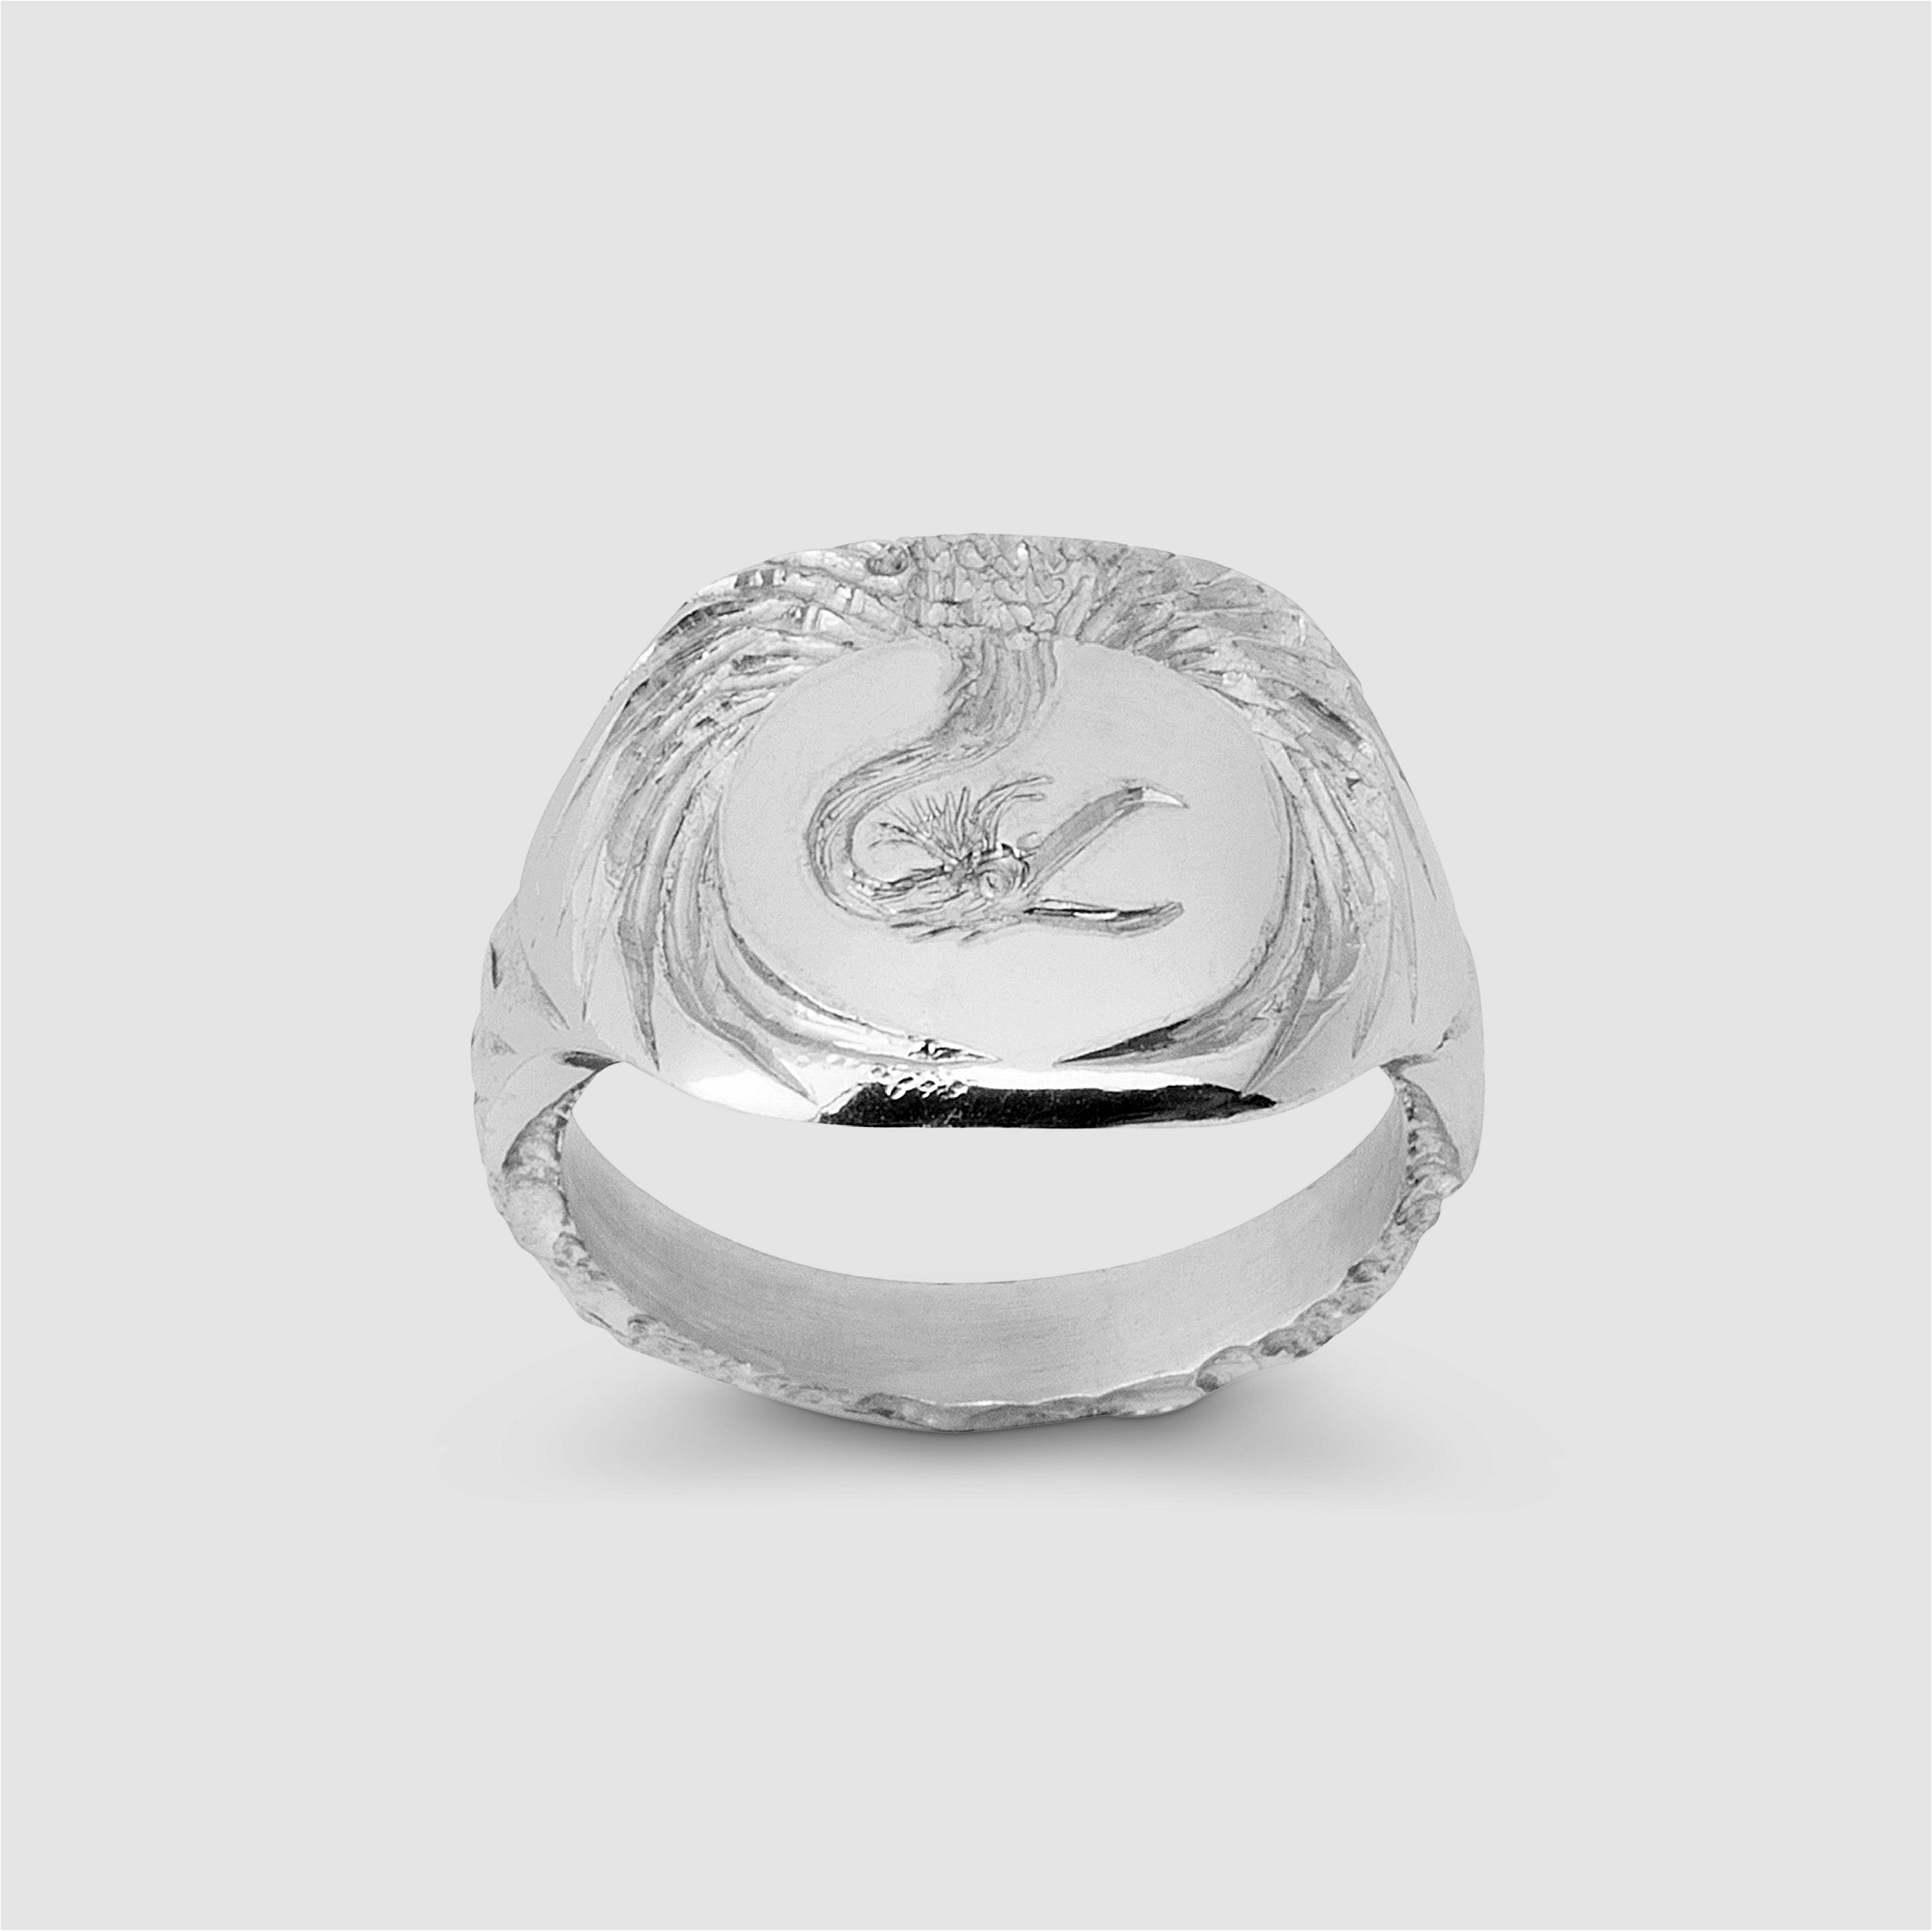 Silver Phoenix Cushion Ring by CASTRO